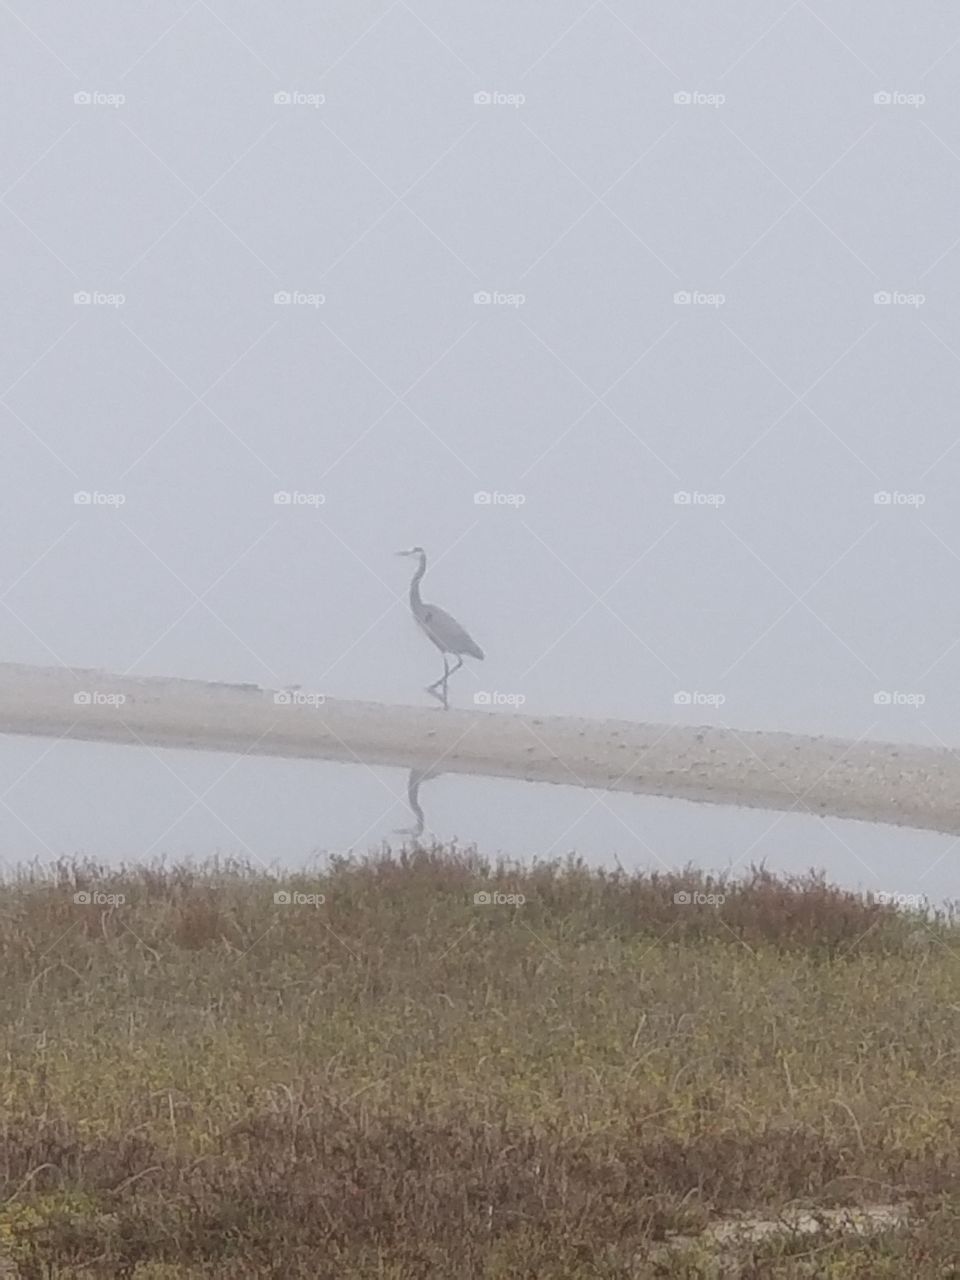 A walk on the beach is the best serenity.
To see wilderness is breathtaking! 
Fog and mist can make such beauty in a photo